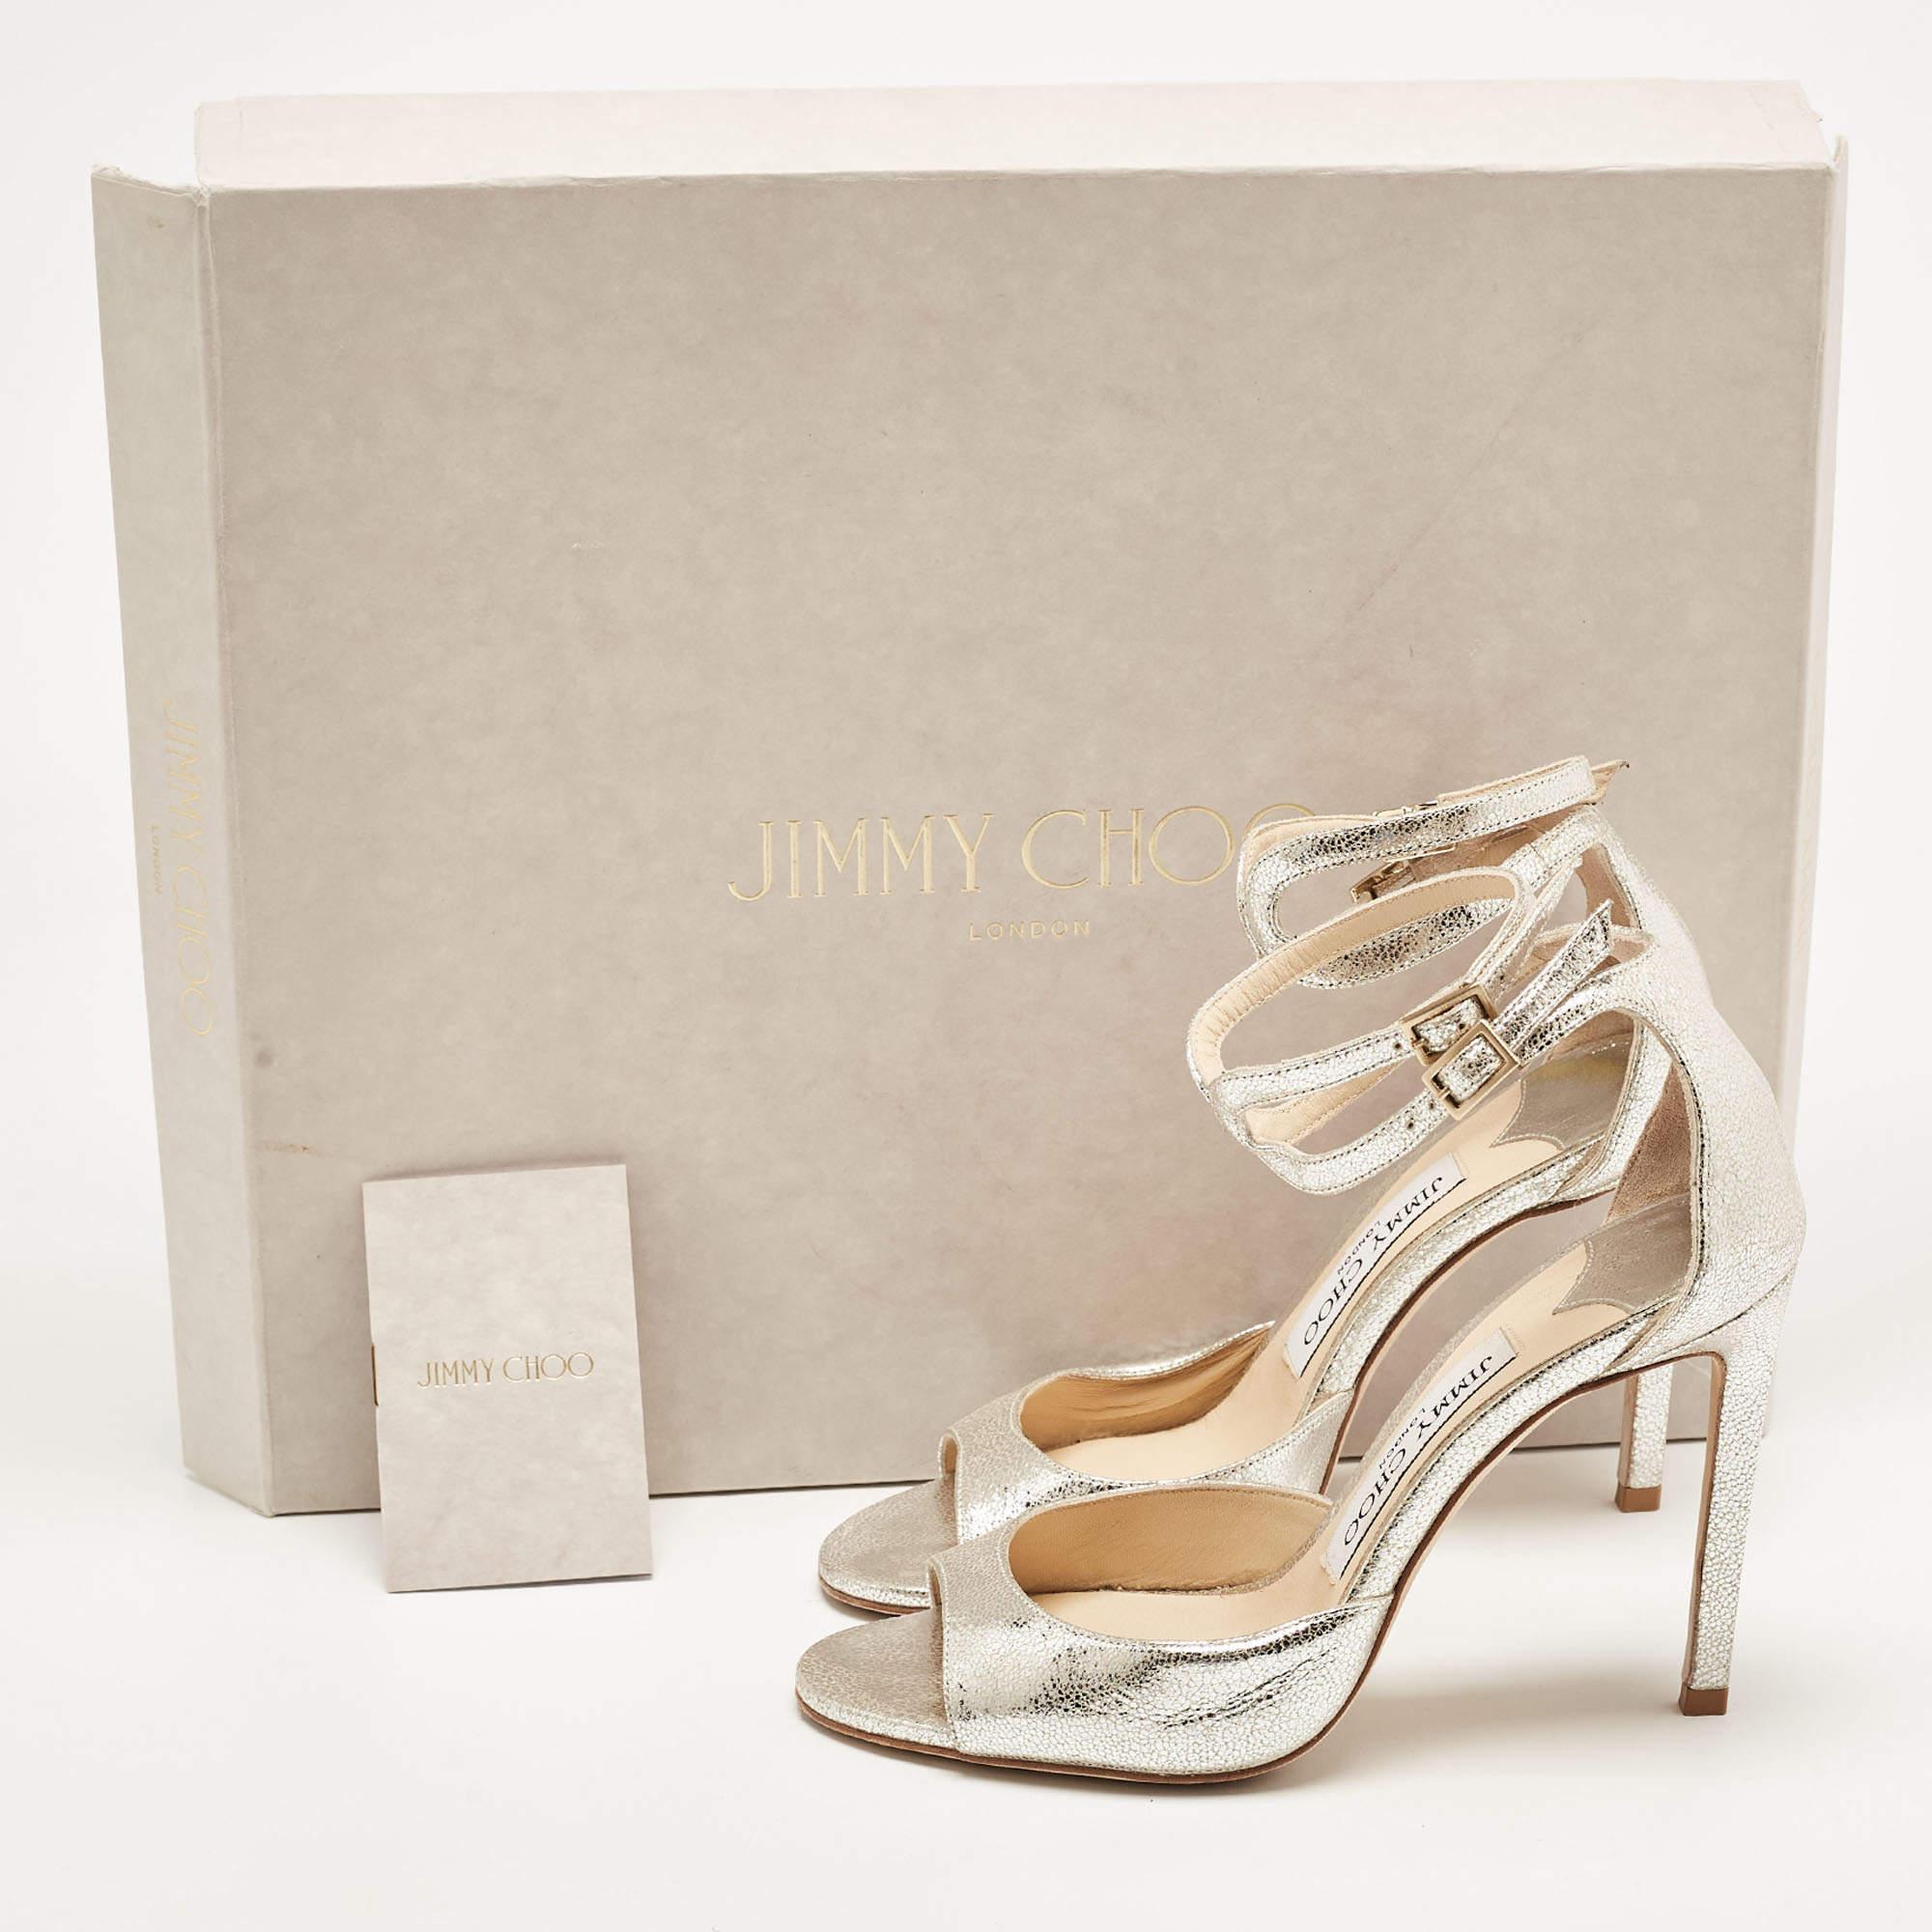 Jimmy Choo Silver Crackled Patent Leather Lane Sandals Size 35 For Sale 2